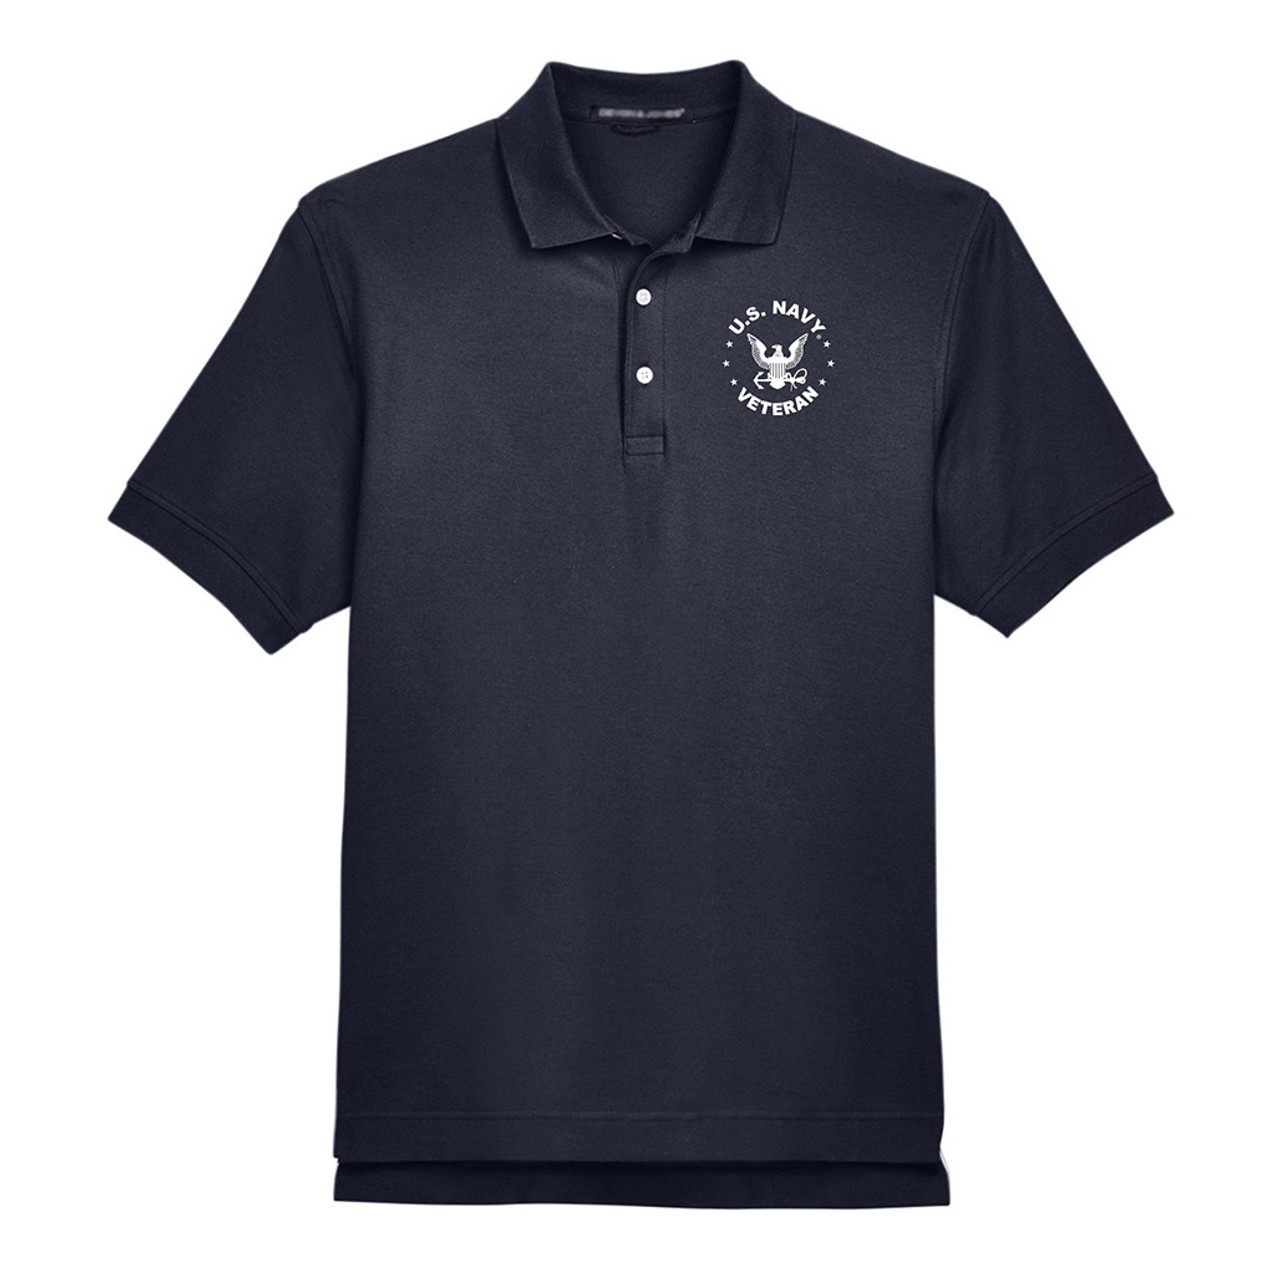 US Navy Polo shirts | VetFriends | Online Store